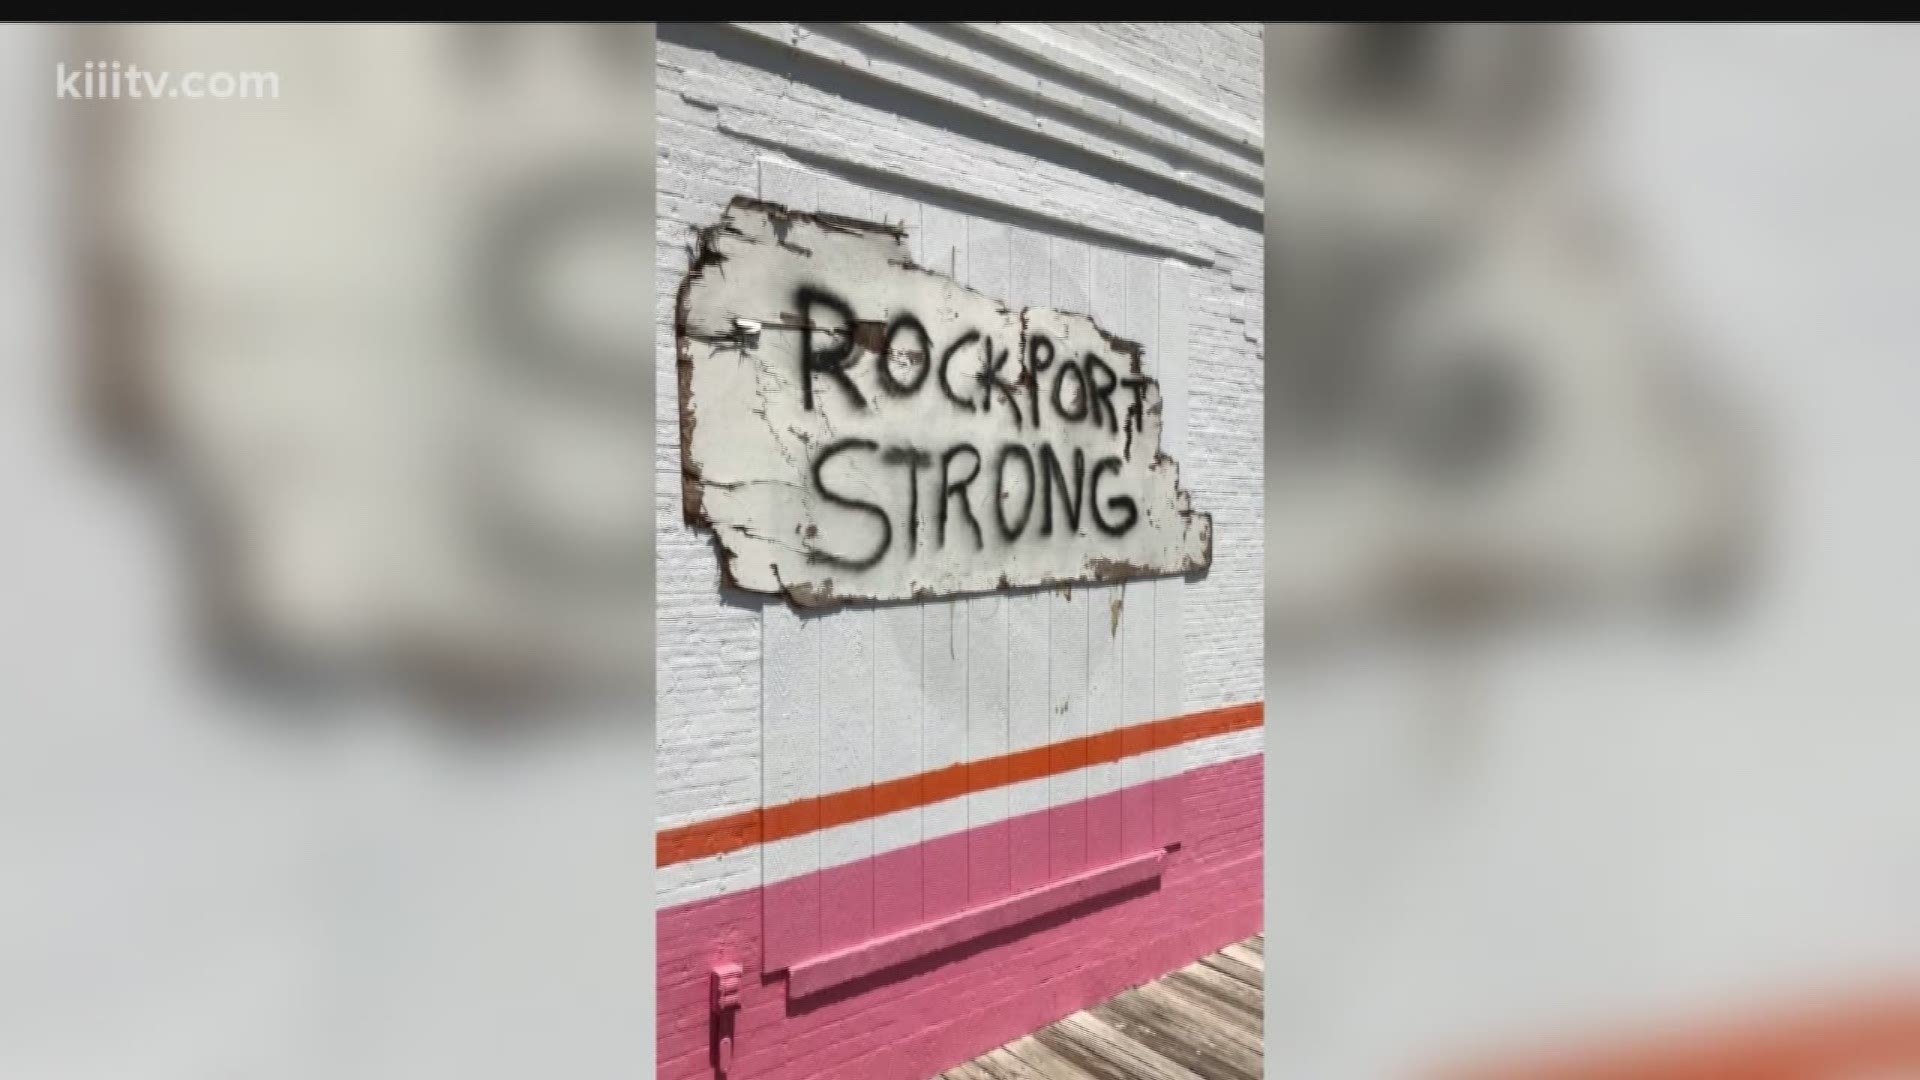 A shop owner in Rockport is searching Thursday for a homemade sign that was recently stolen and was meant to show the city's determination to recover from Hurricane Harvey. 